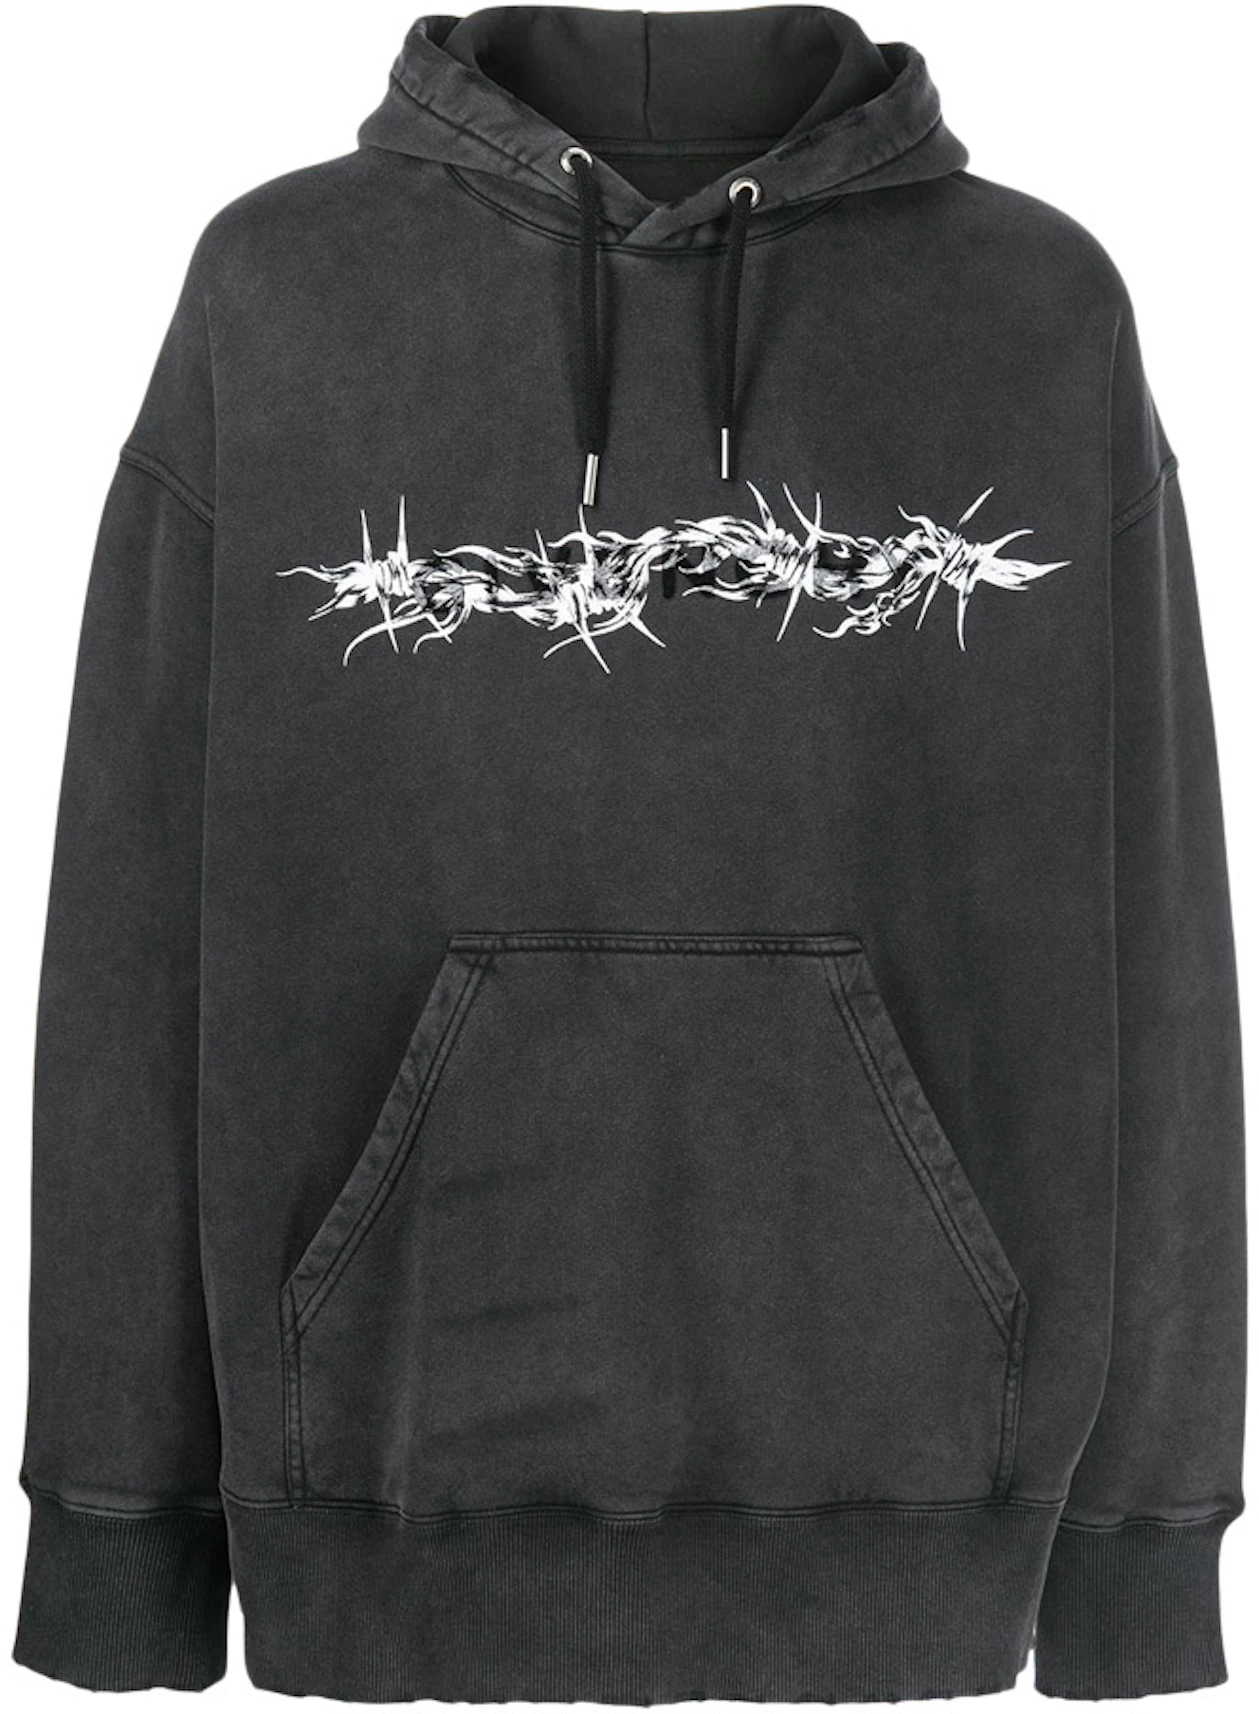 Givenchy Barbed wire Print Hoodie Black - US